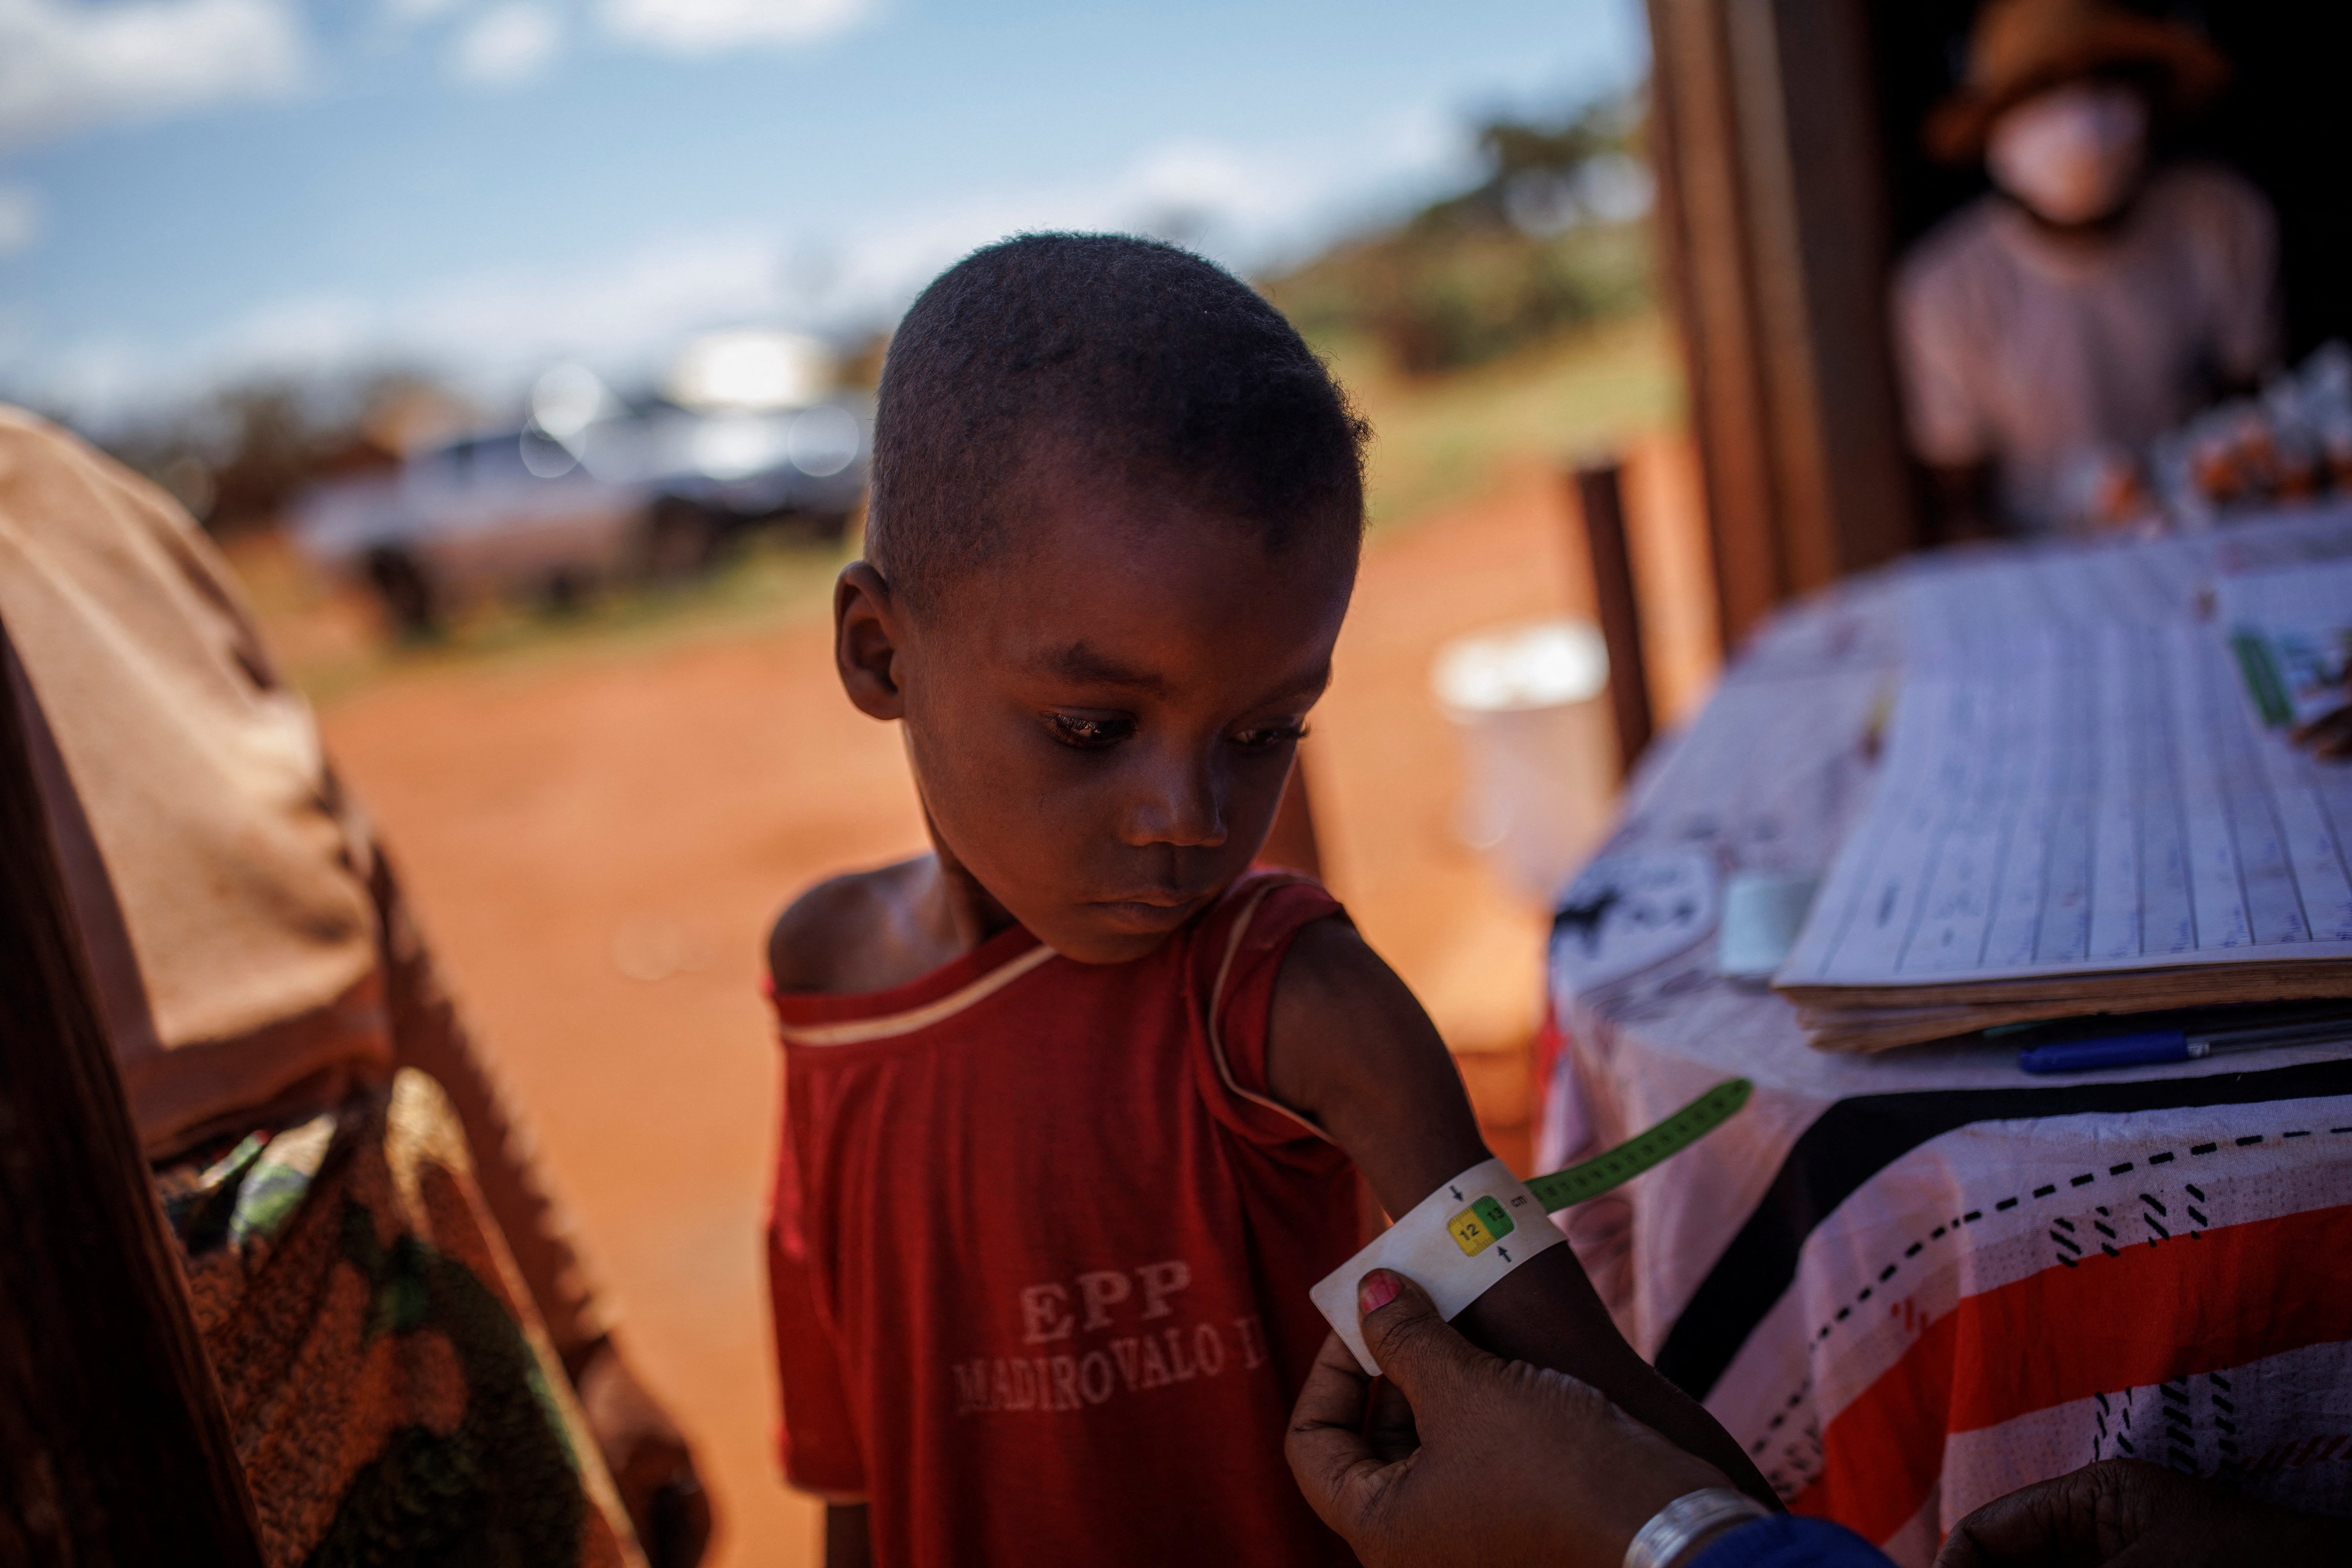 Avoraza is examined at a children’s malnutrition post run by the World Food Programme